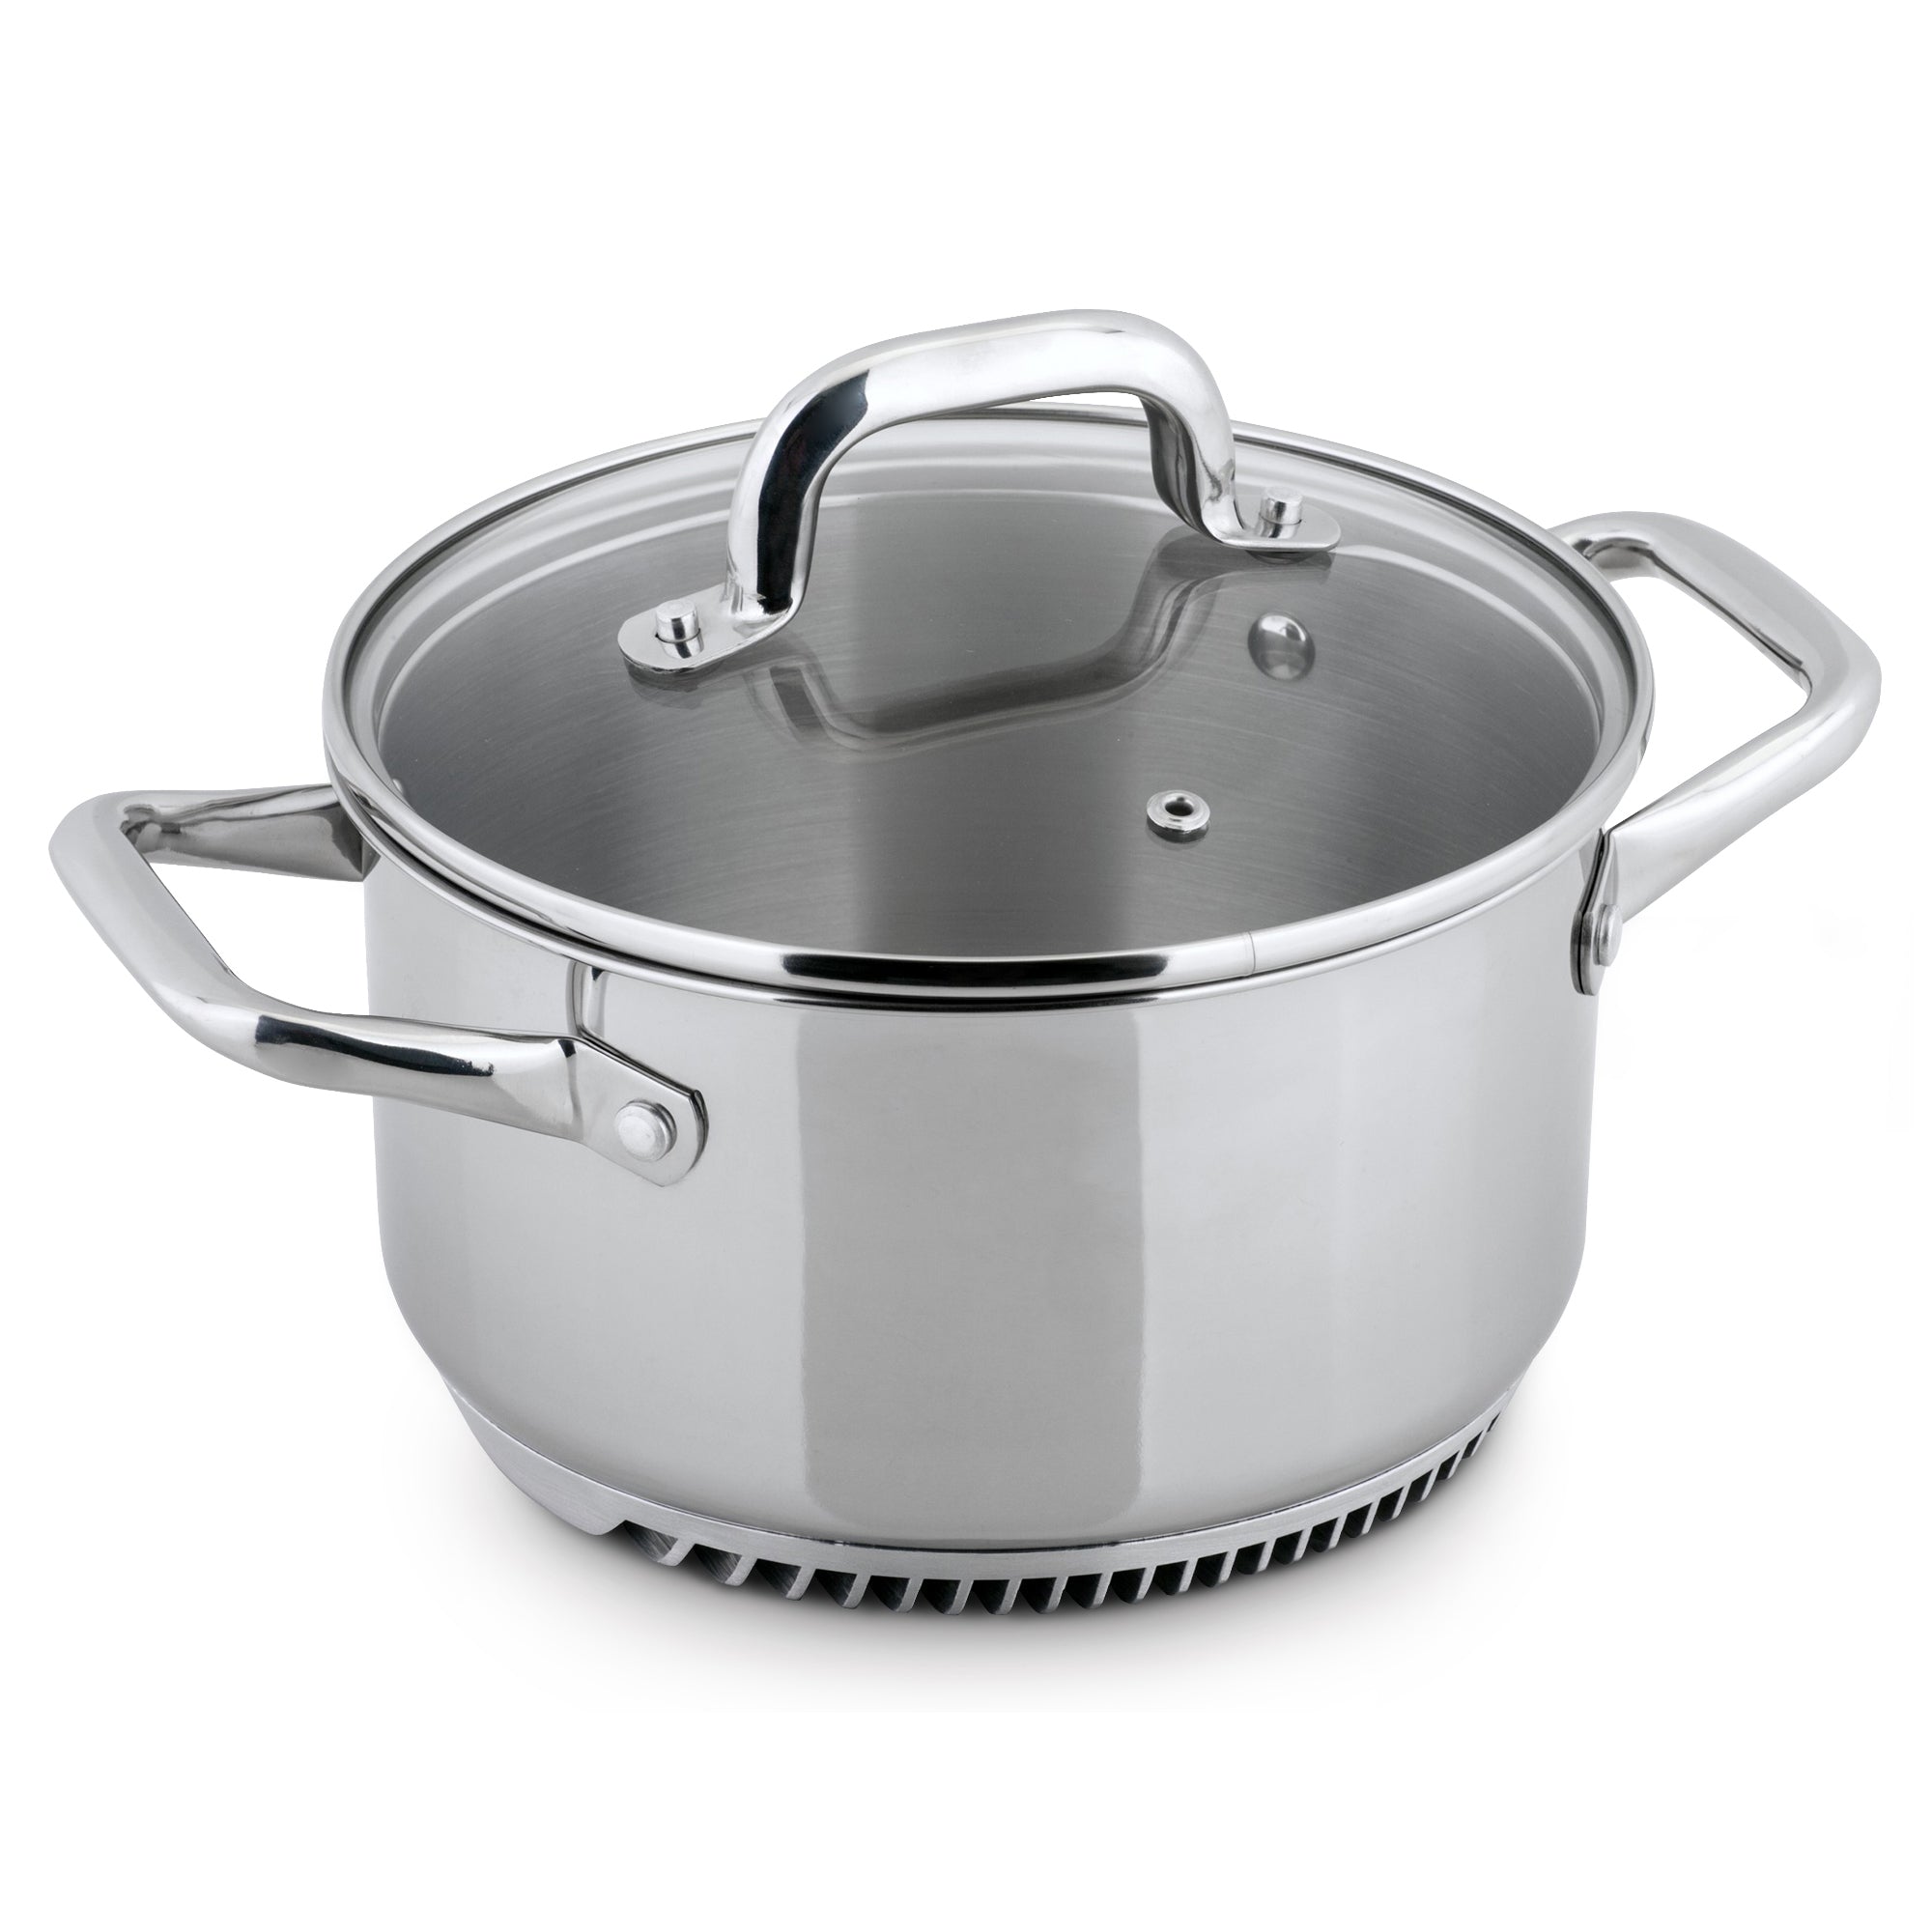 Cook N Home Casserole Dutch Oven Stockpot With Lid Professional